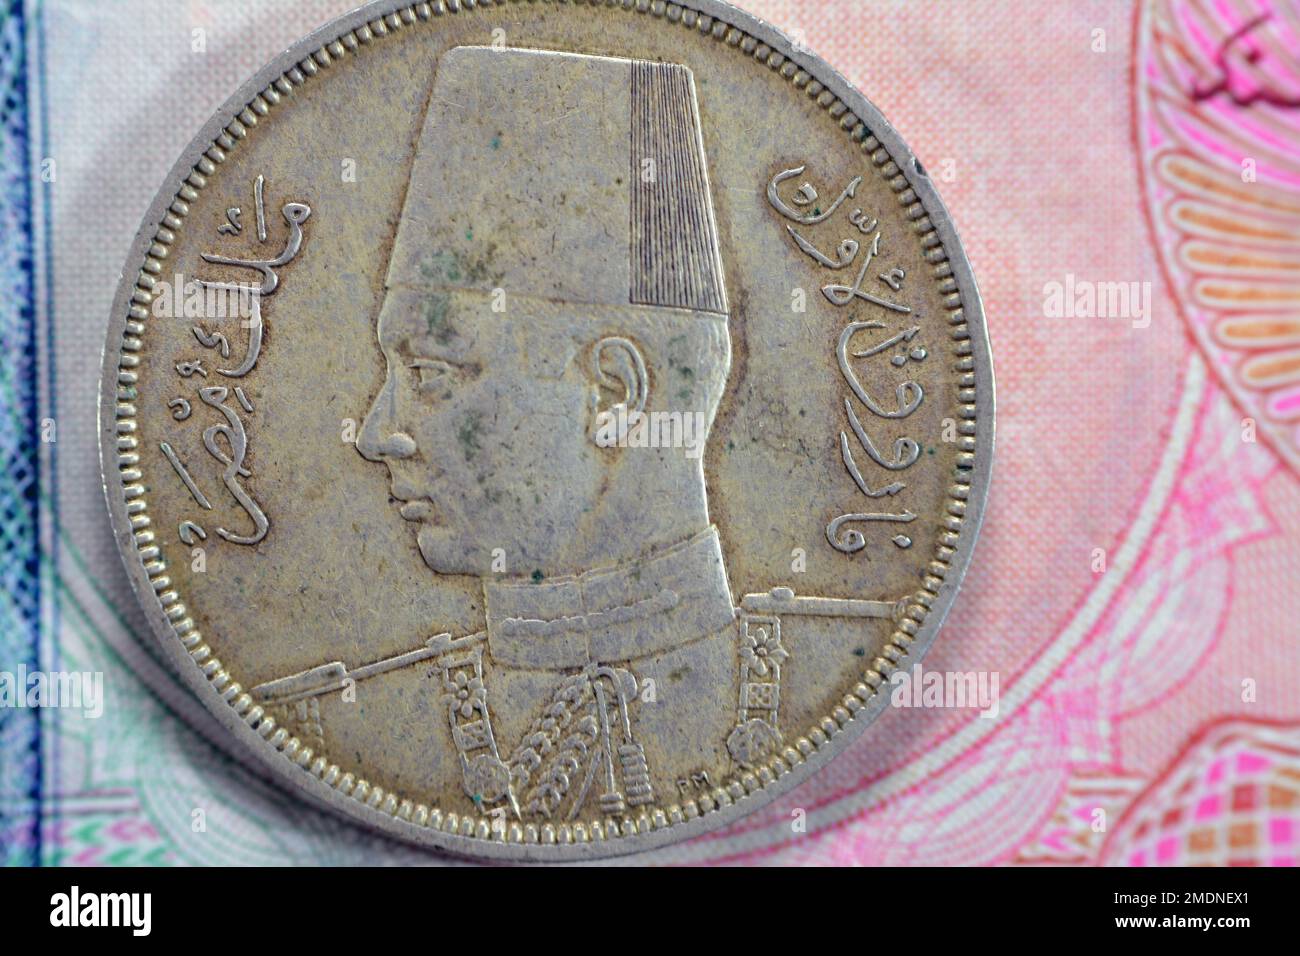 Ancient old ten 10 Egyptian piasters coin at the era of king Farouk I features value and kingdom of Egypt on a side and a bust of King Farouk the 1st Stock Photo